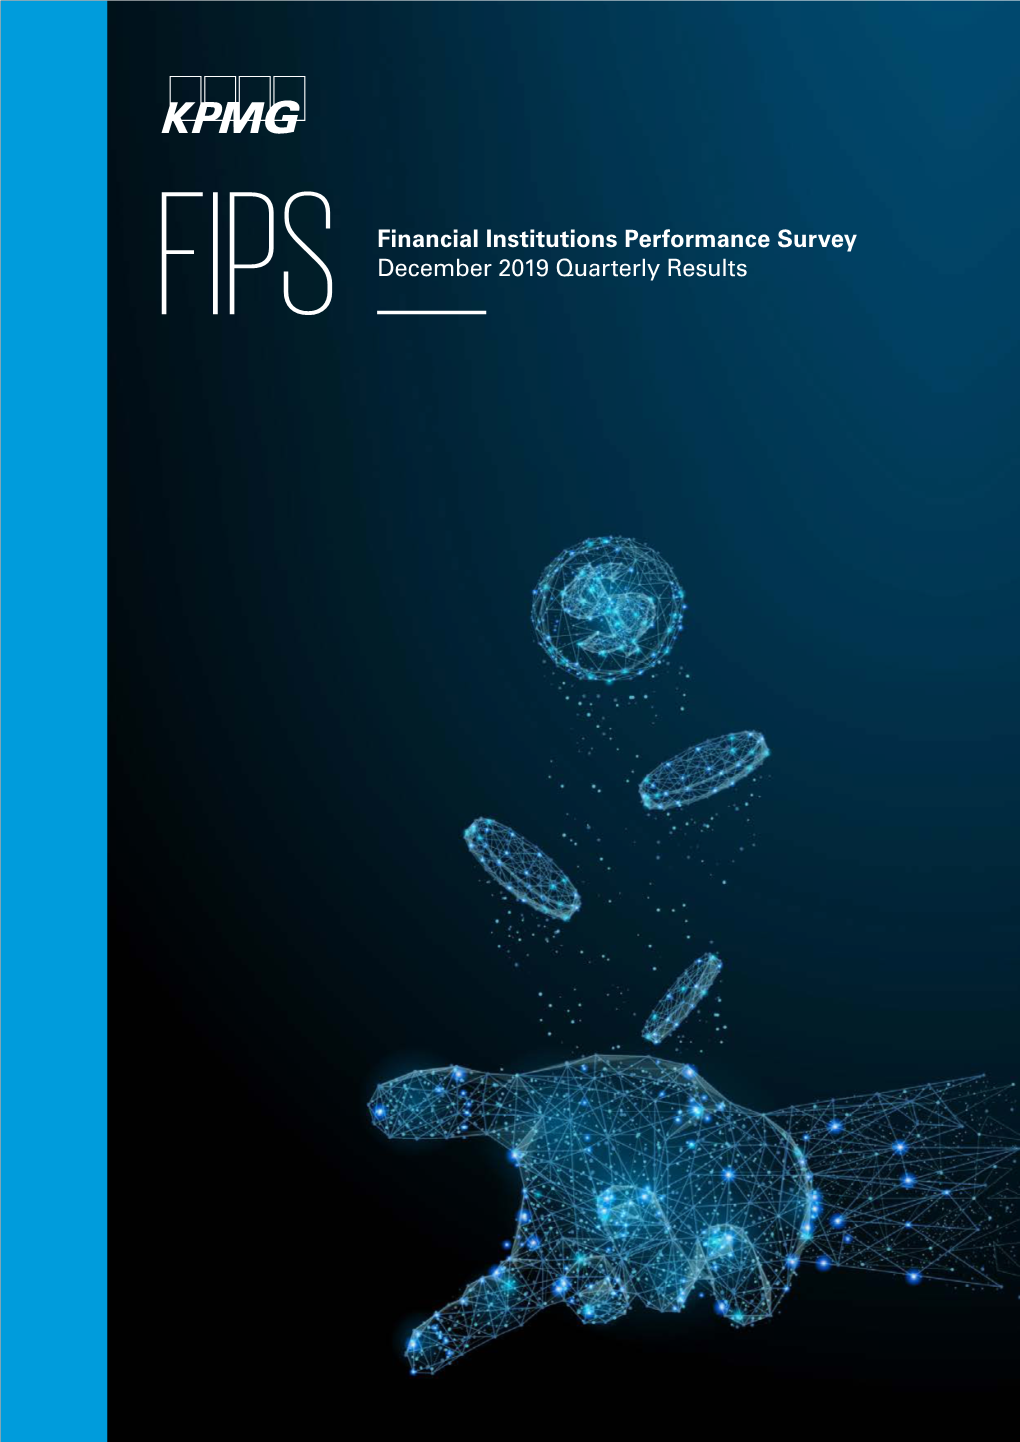 Financial Institutions Performance Survey FIPS December 2019 Quarterly Results 2 | KPMG | FIPS Quarterly Results December 2019 Overview